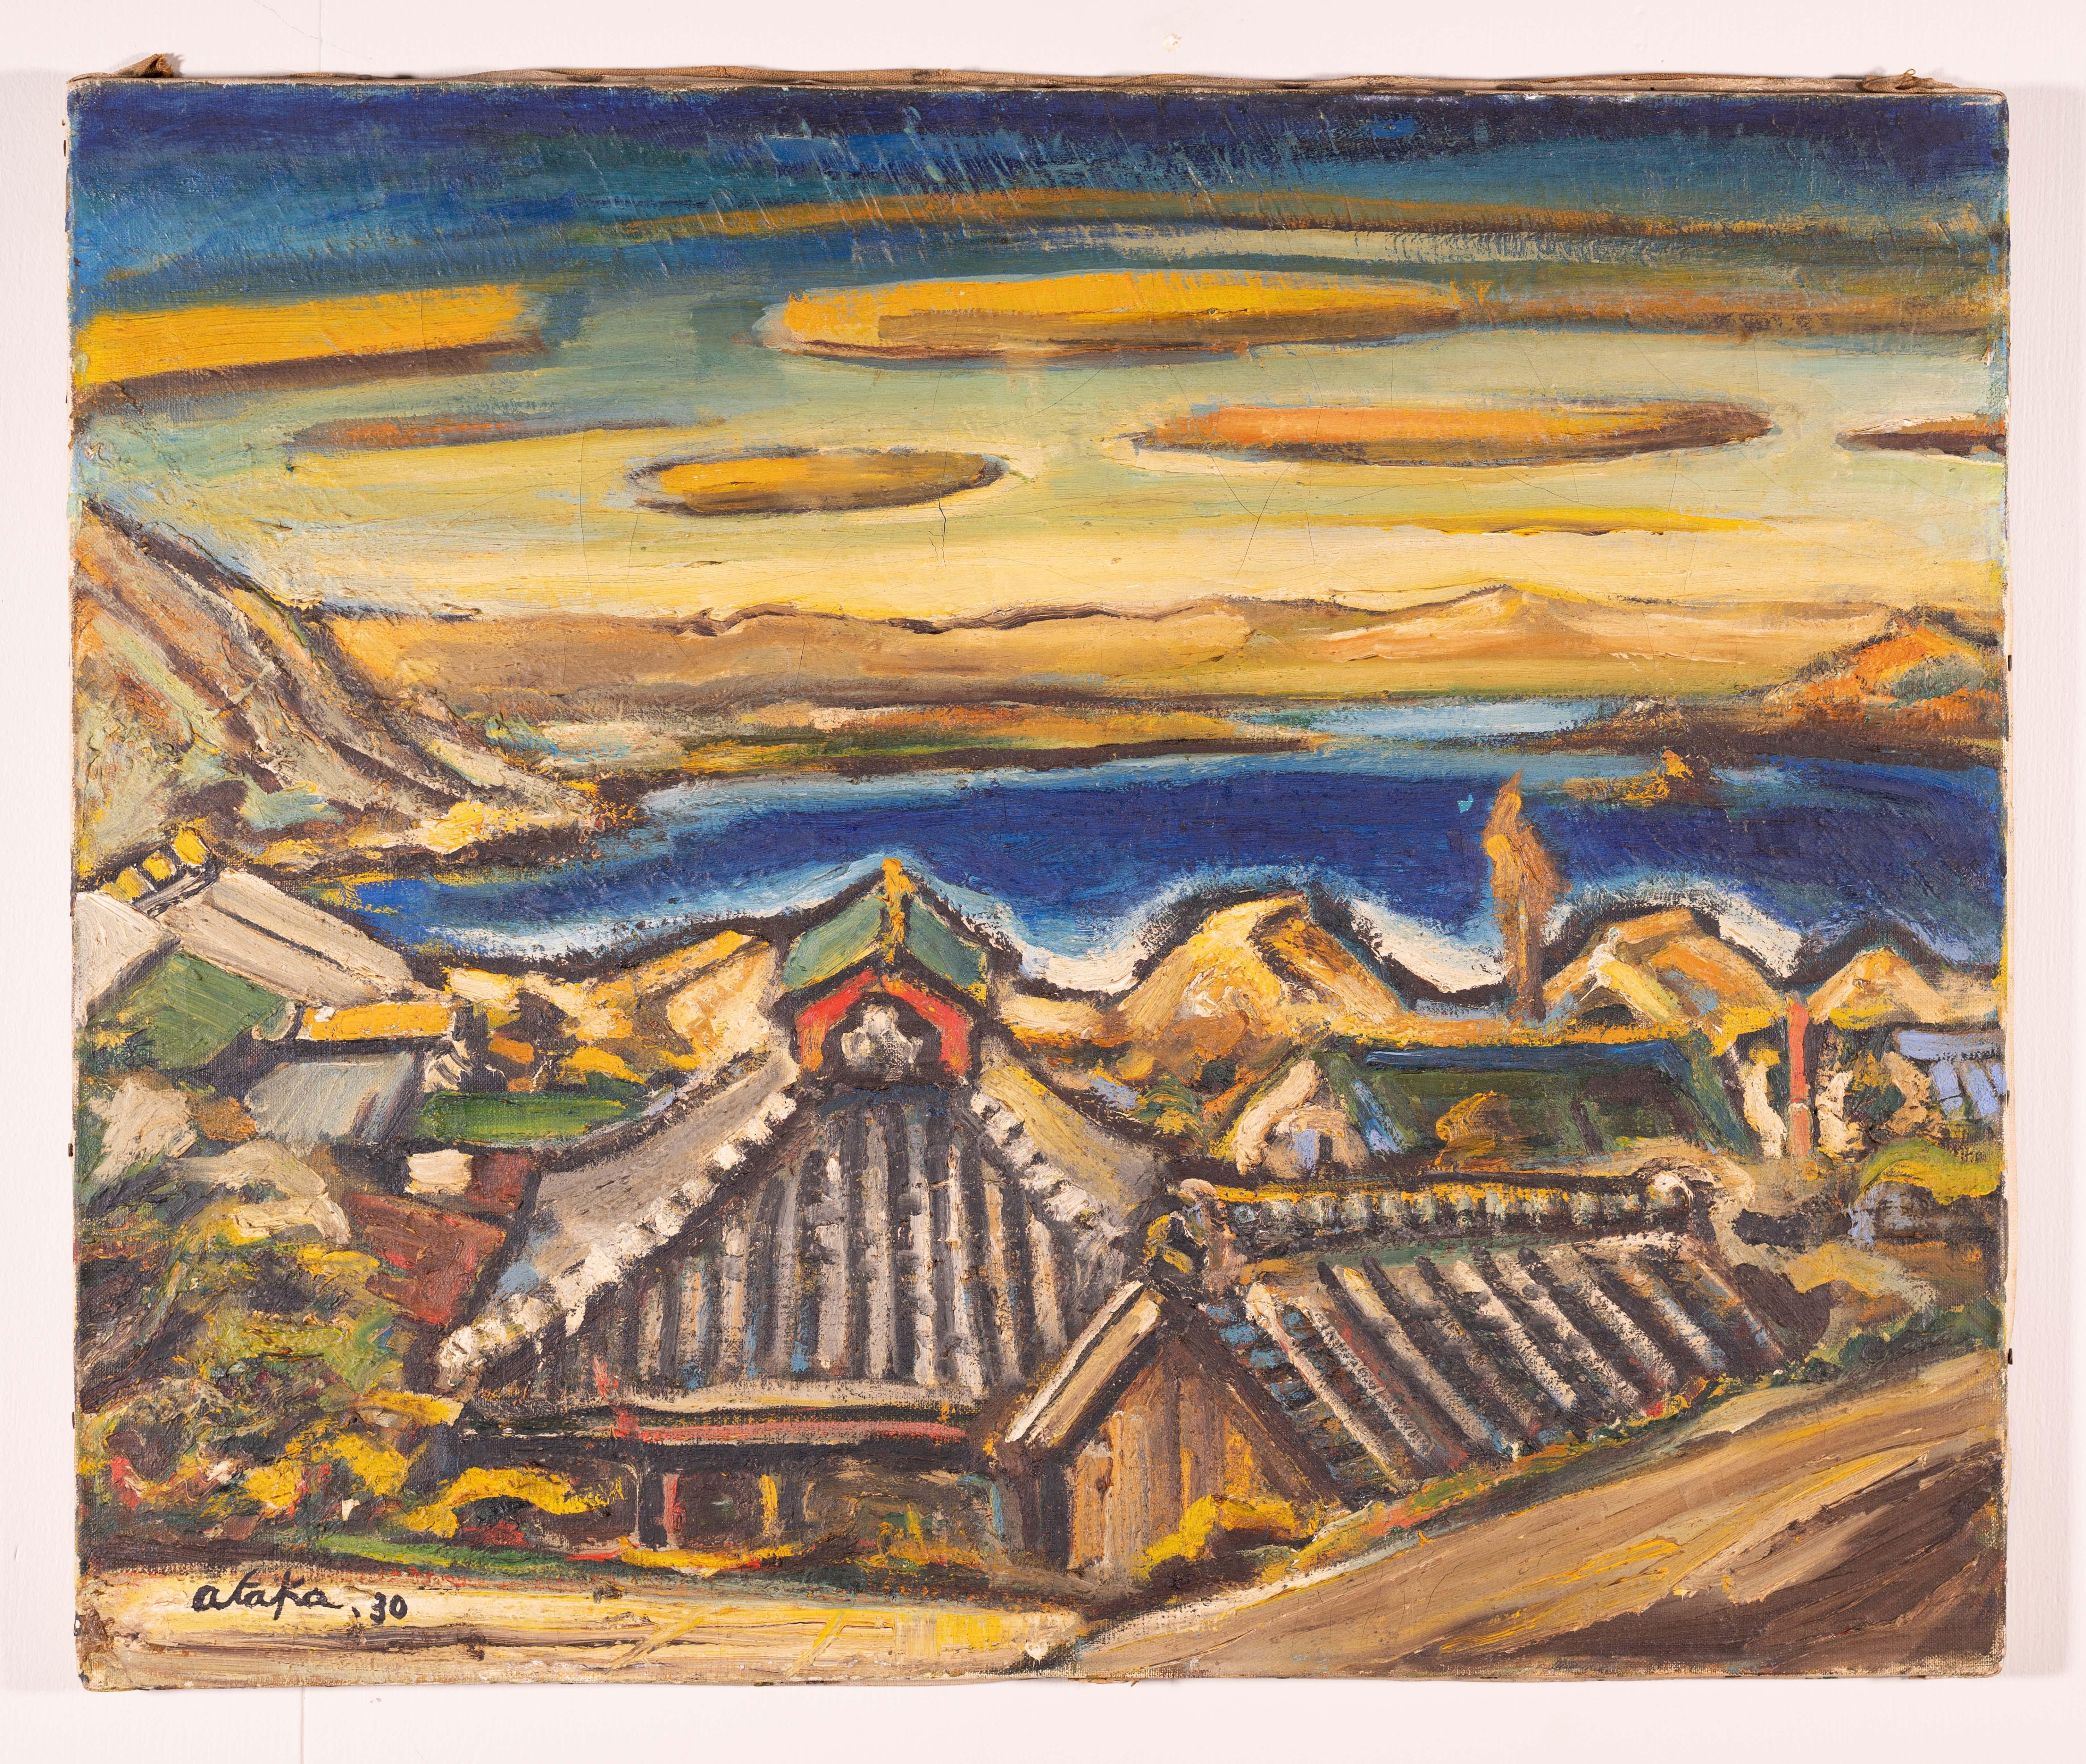 A Modern oil painting of a harbor town with the water and mountains views in the distance.
It is signed on the bottom left hand corner Ataka and dated '30 (1930).
The brushwork is bold and confident. Ataka traveled to Europe and Paris in the late